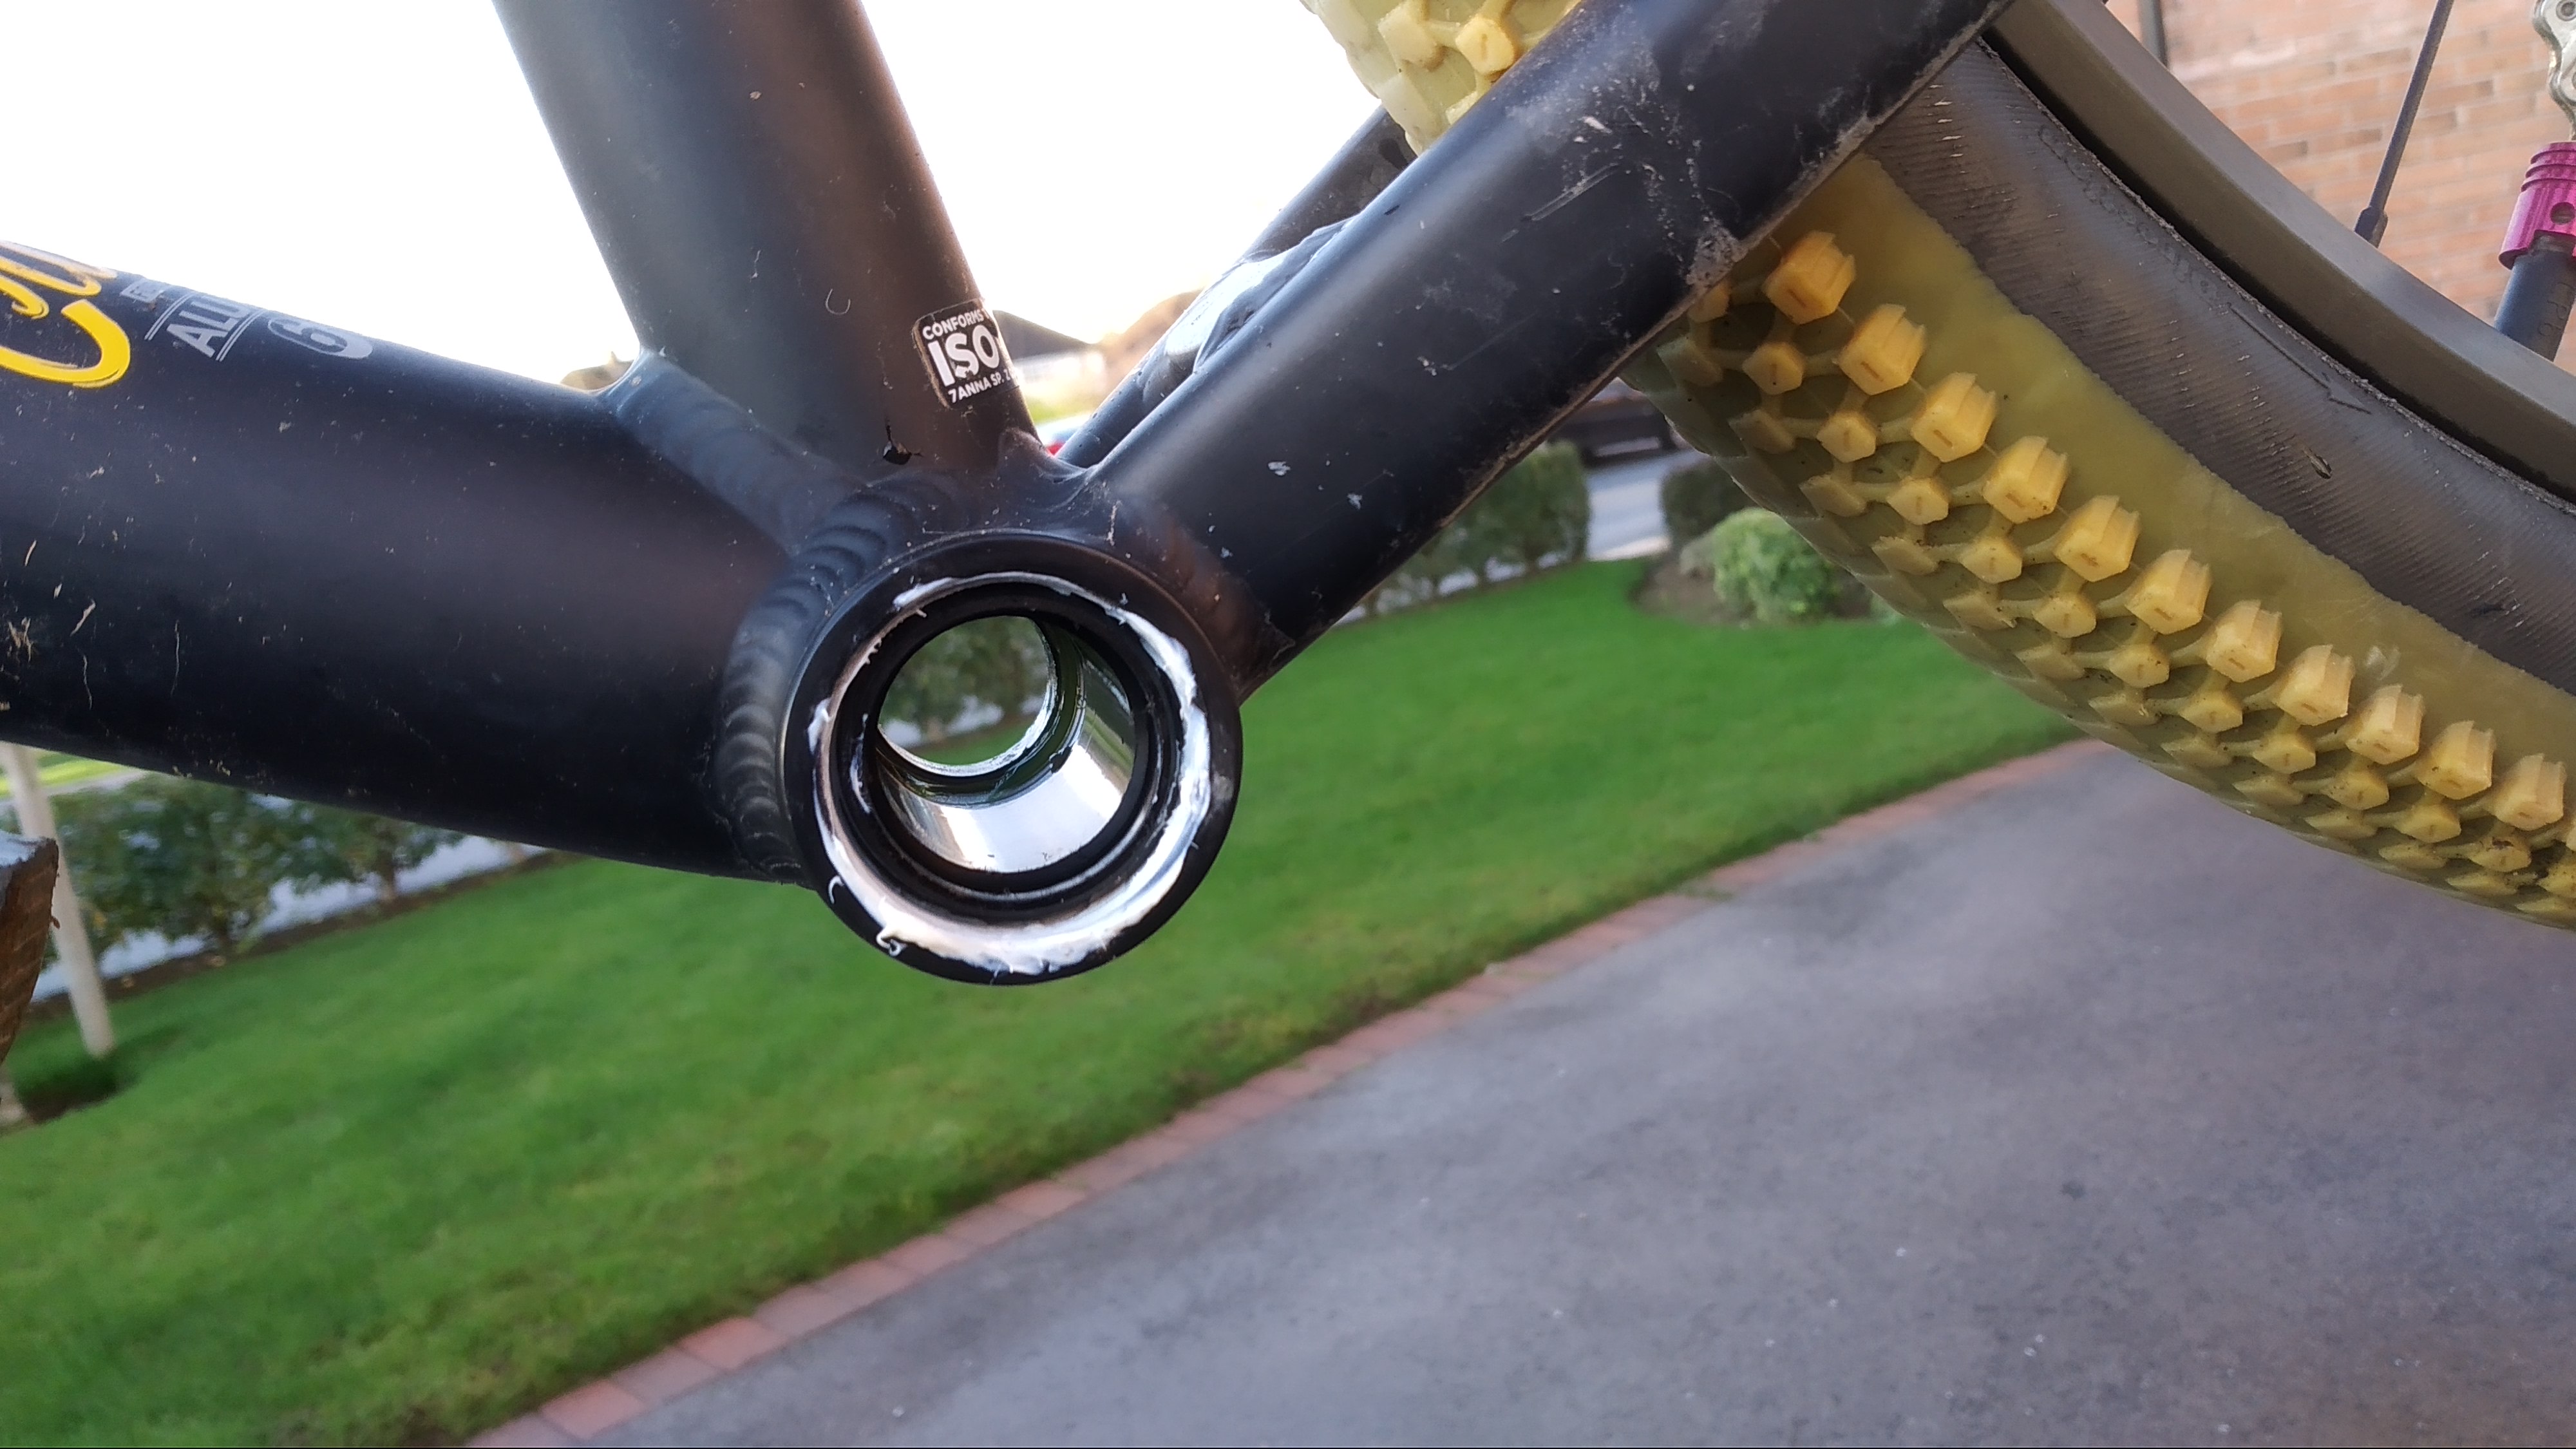 From the non-driveside you can see through the bottom bracket. The middle sleeve is installed, and the threads are greased.